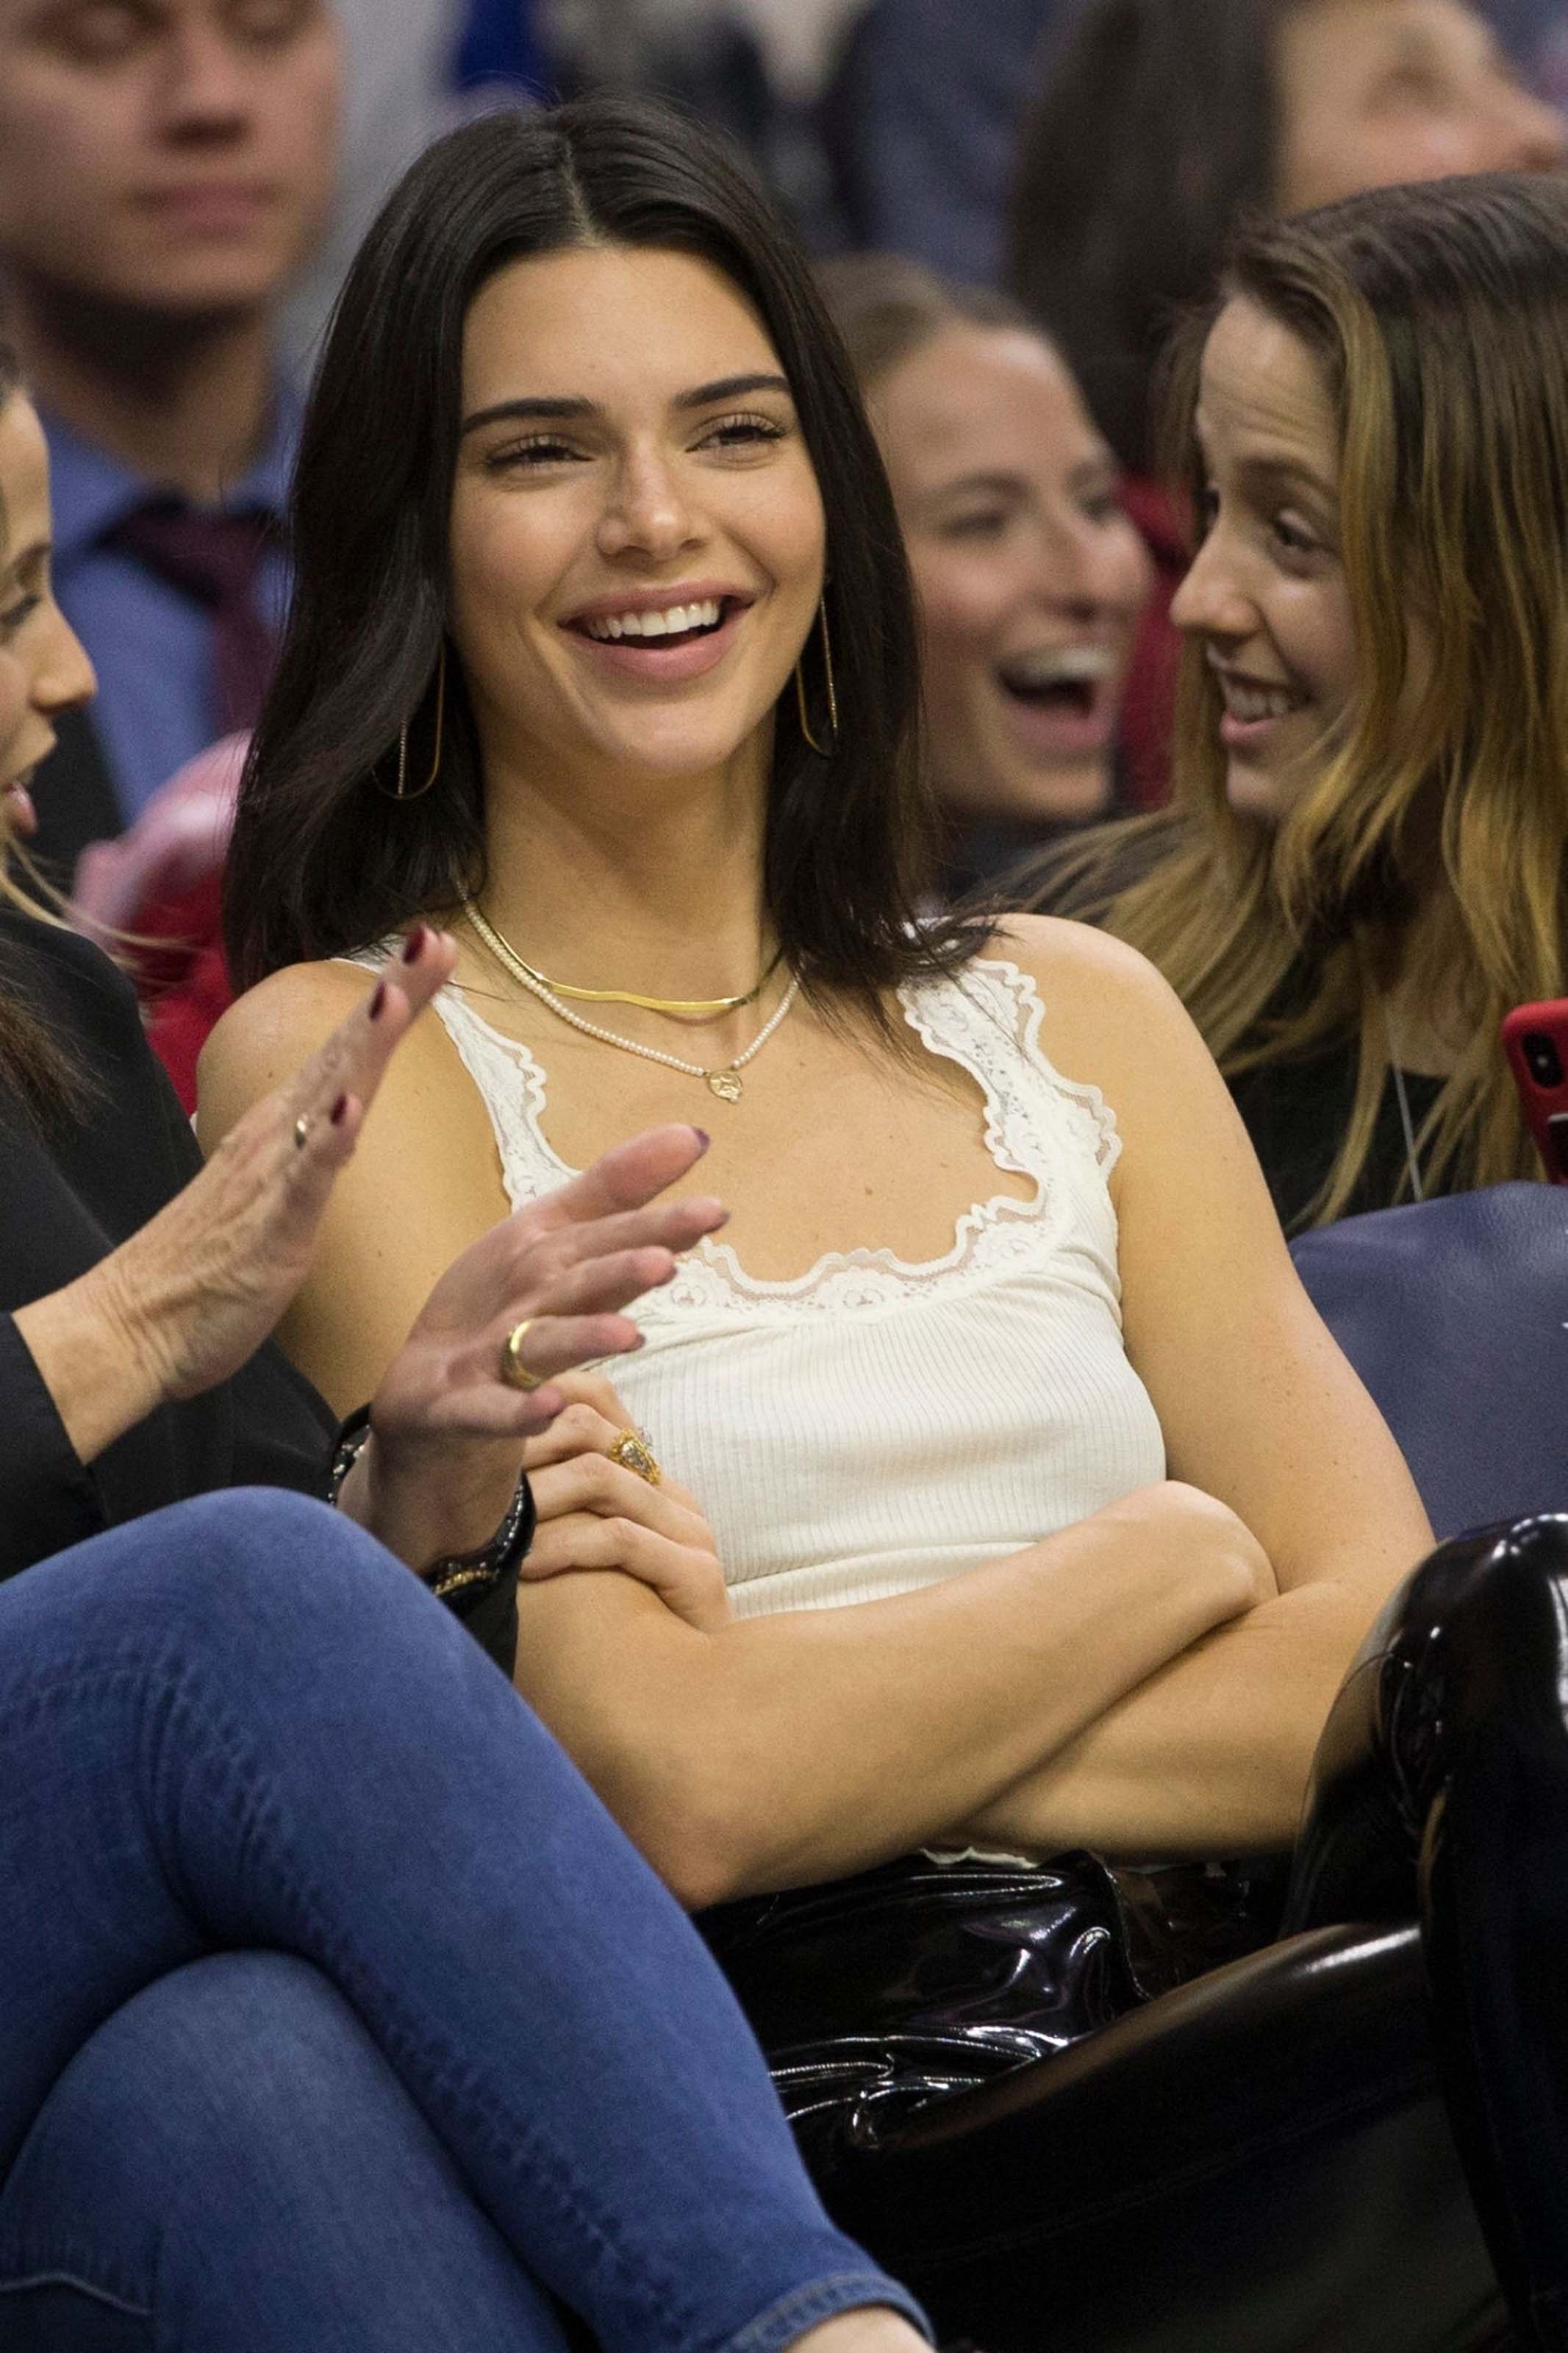 Kendall Jenner attends the Washington Wizards